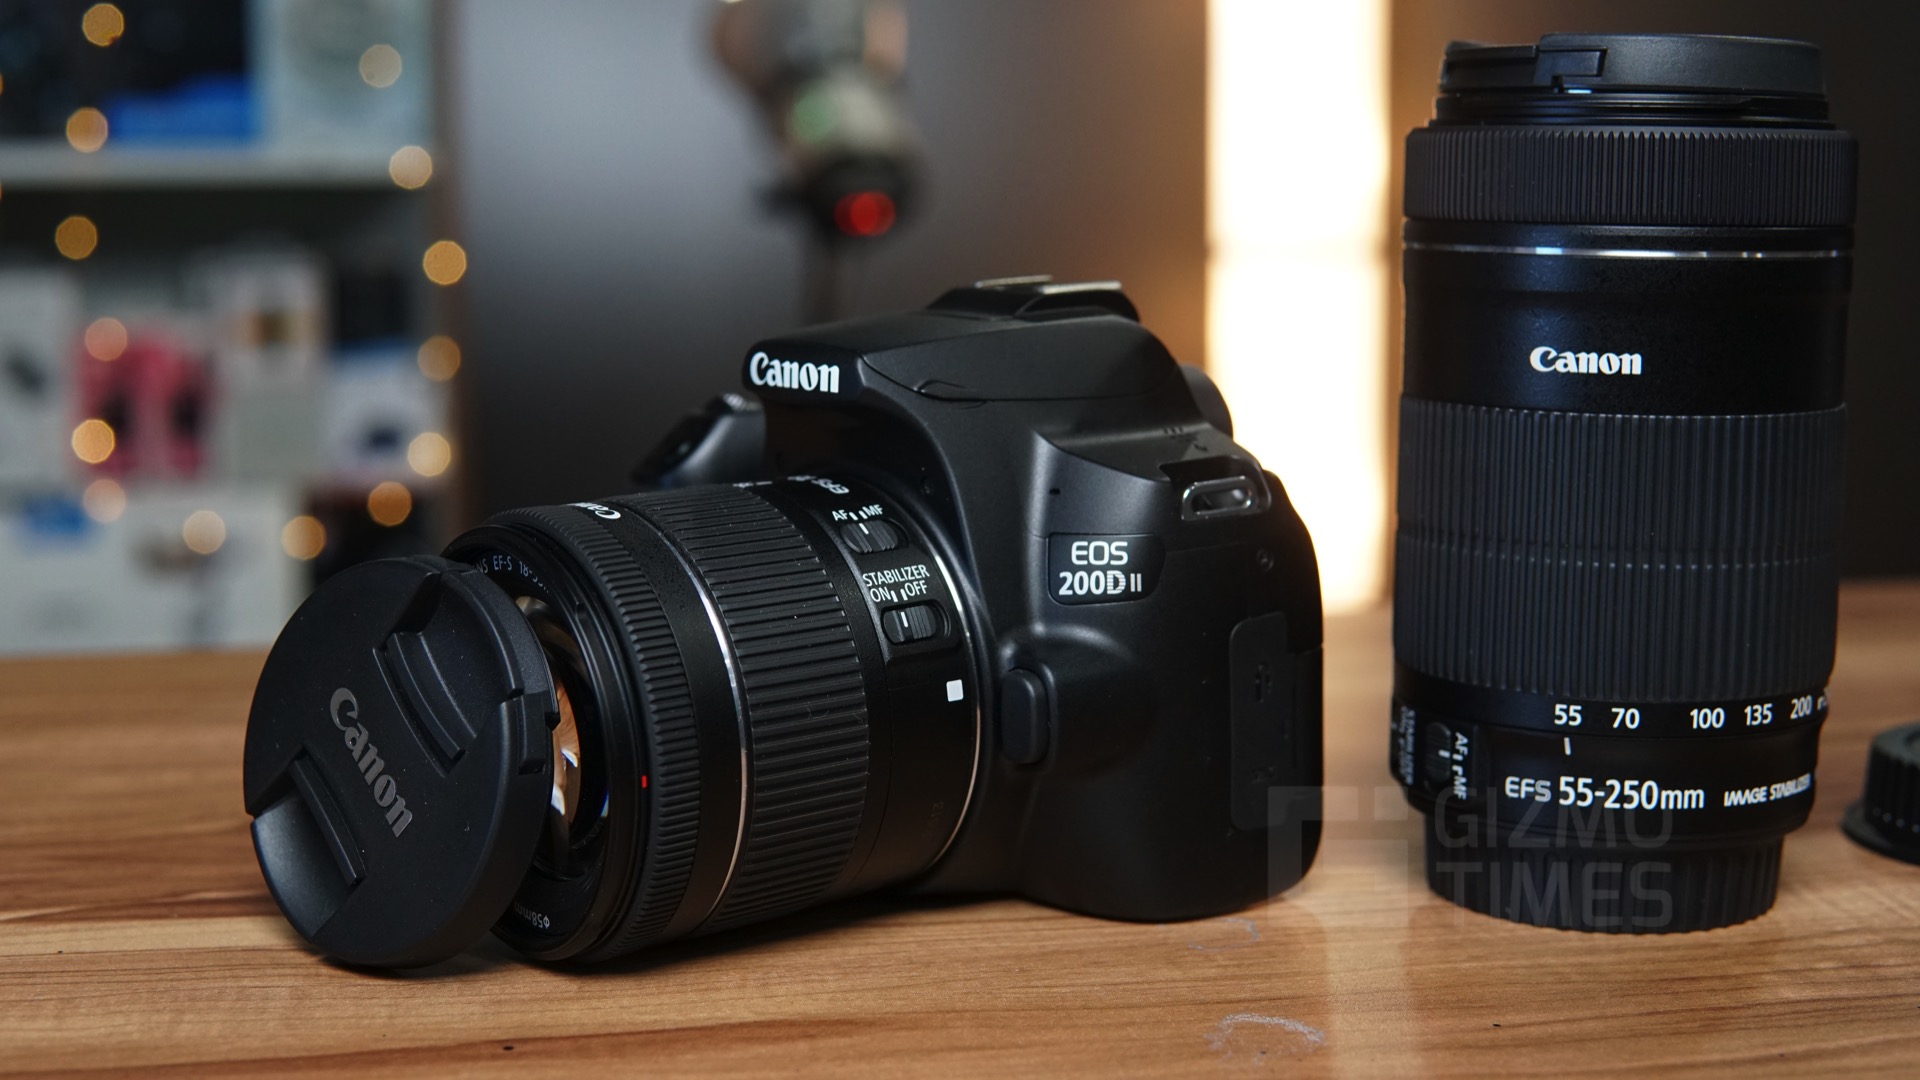 Canon EOS 200D II Review, Pros and Cons 4K DSLR Camera